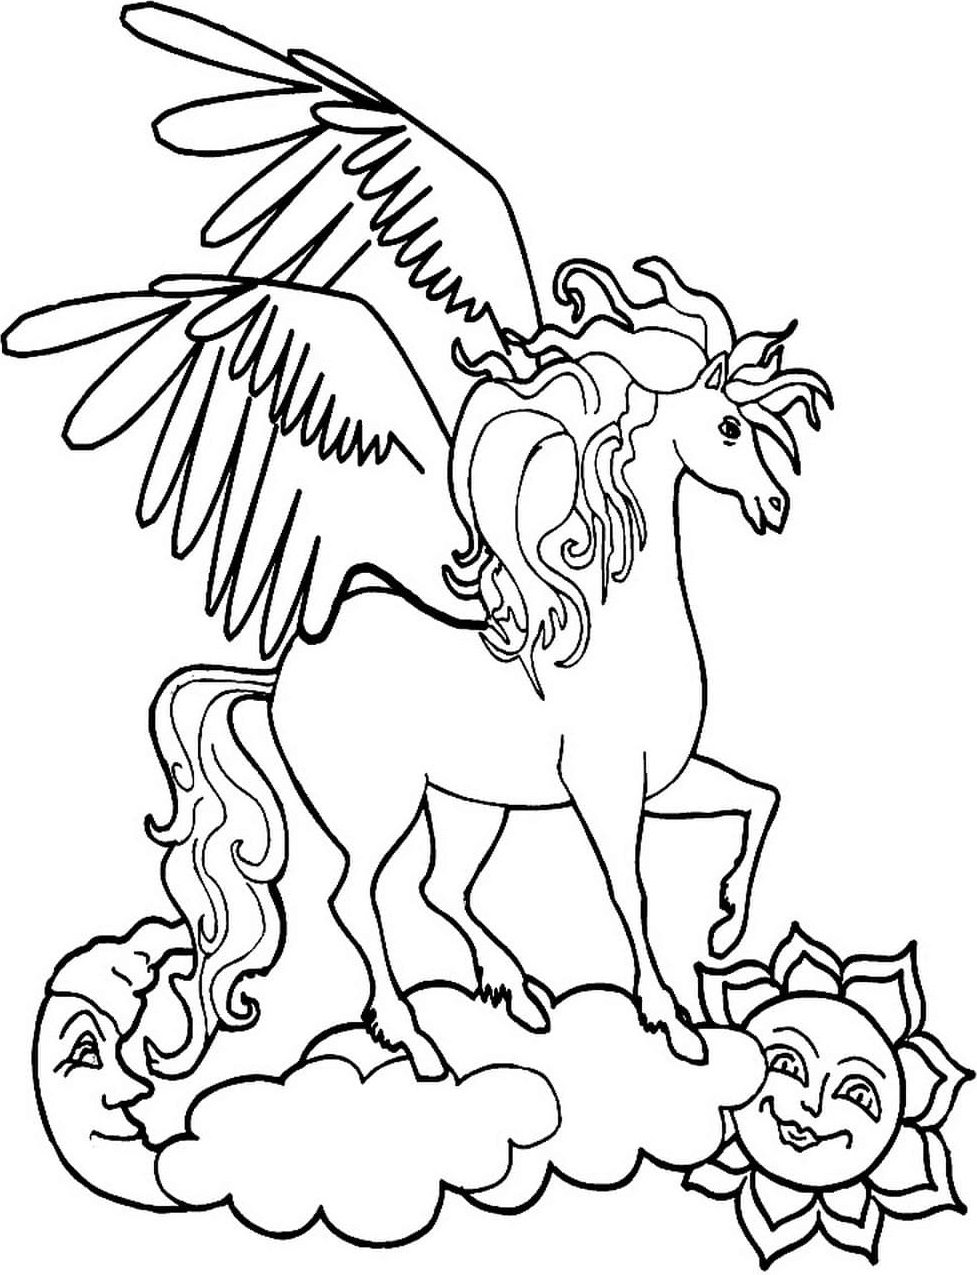 Unicorn Standing On Cloud Coloring Page